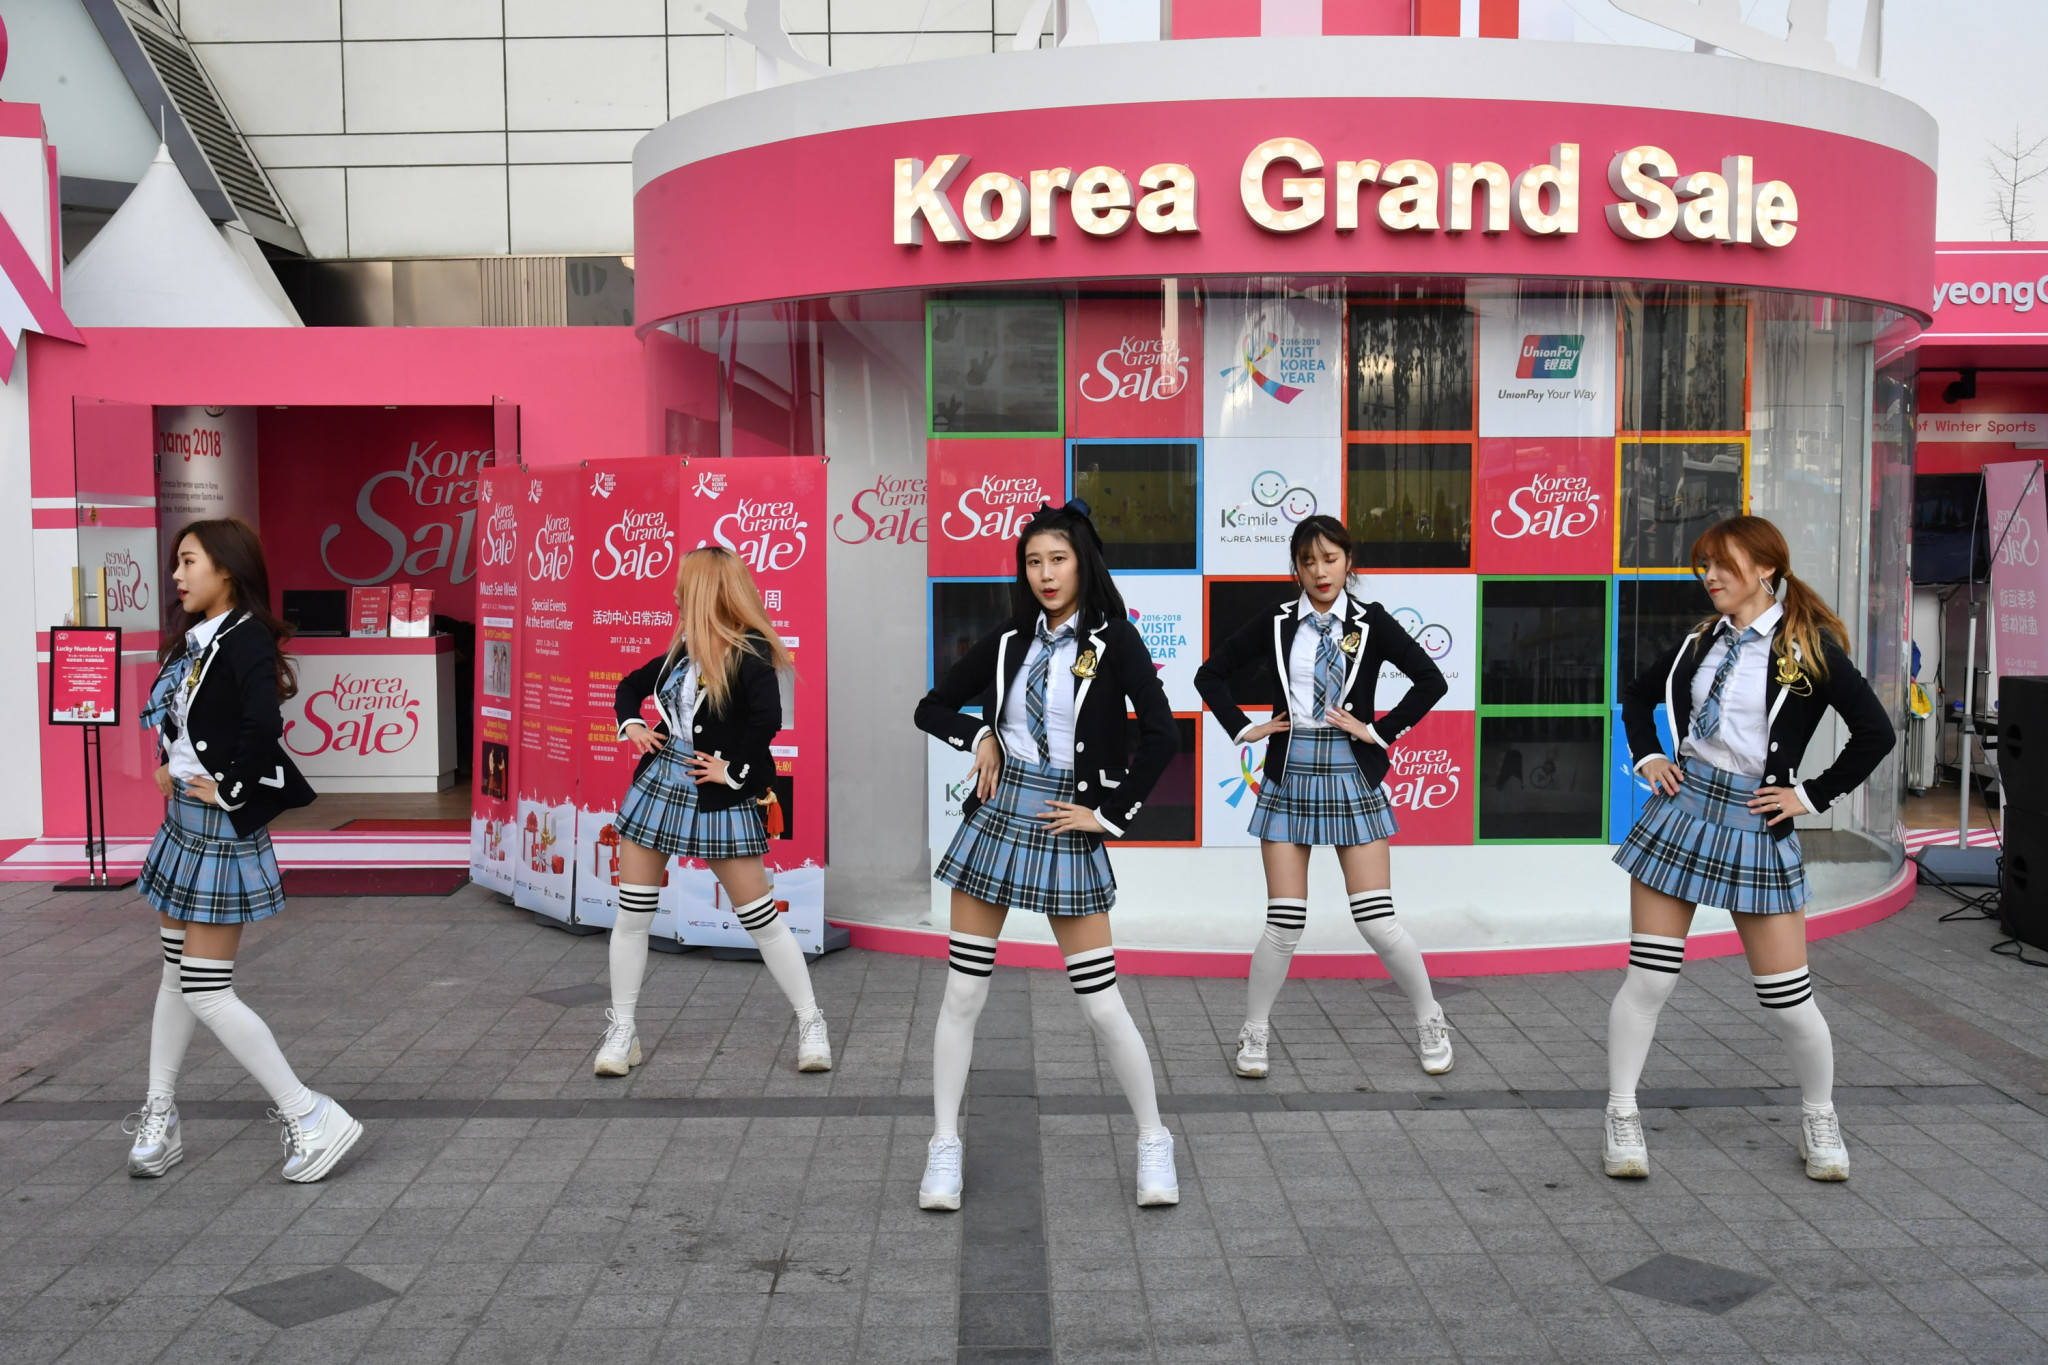 The Korea Grand Sale, designed to encourage foreigners to visit South Korea during Pyeongchang 2018,will included themed events on different aspects of life in South Korea, including K-pop ©Visit Korea Committee